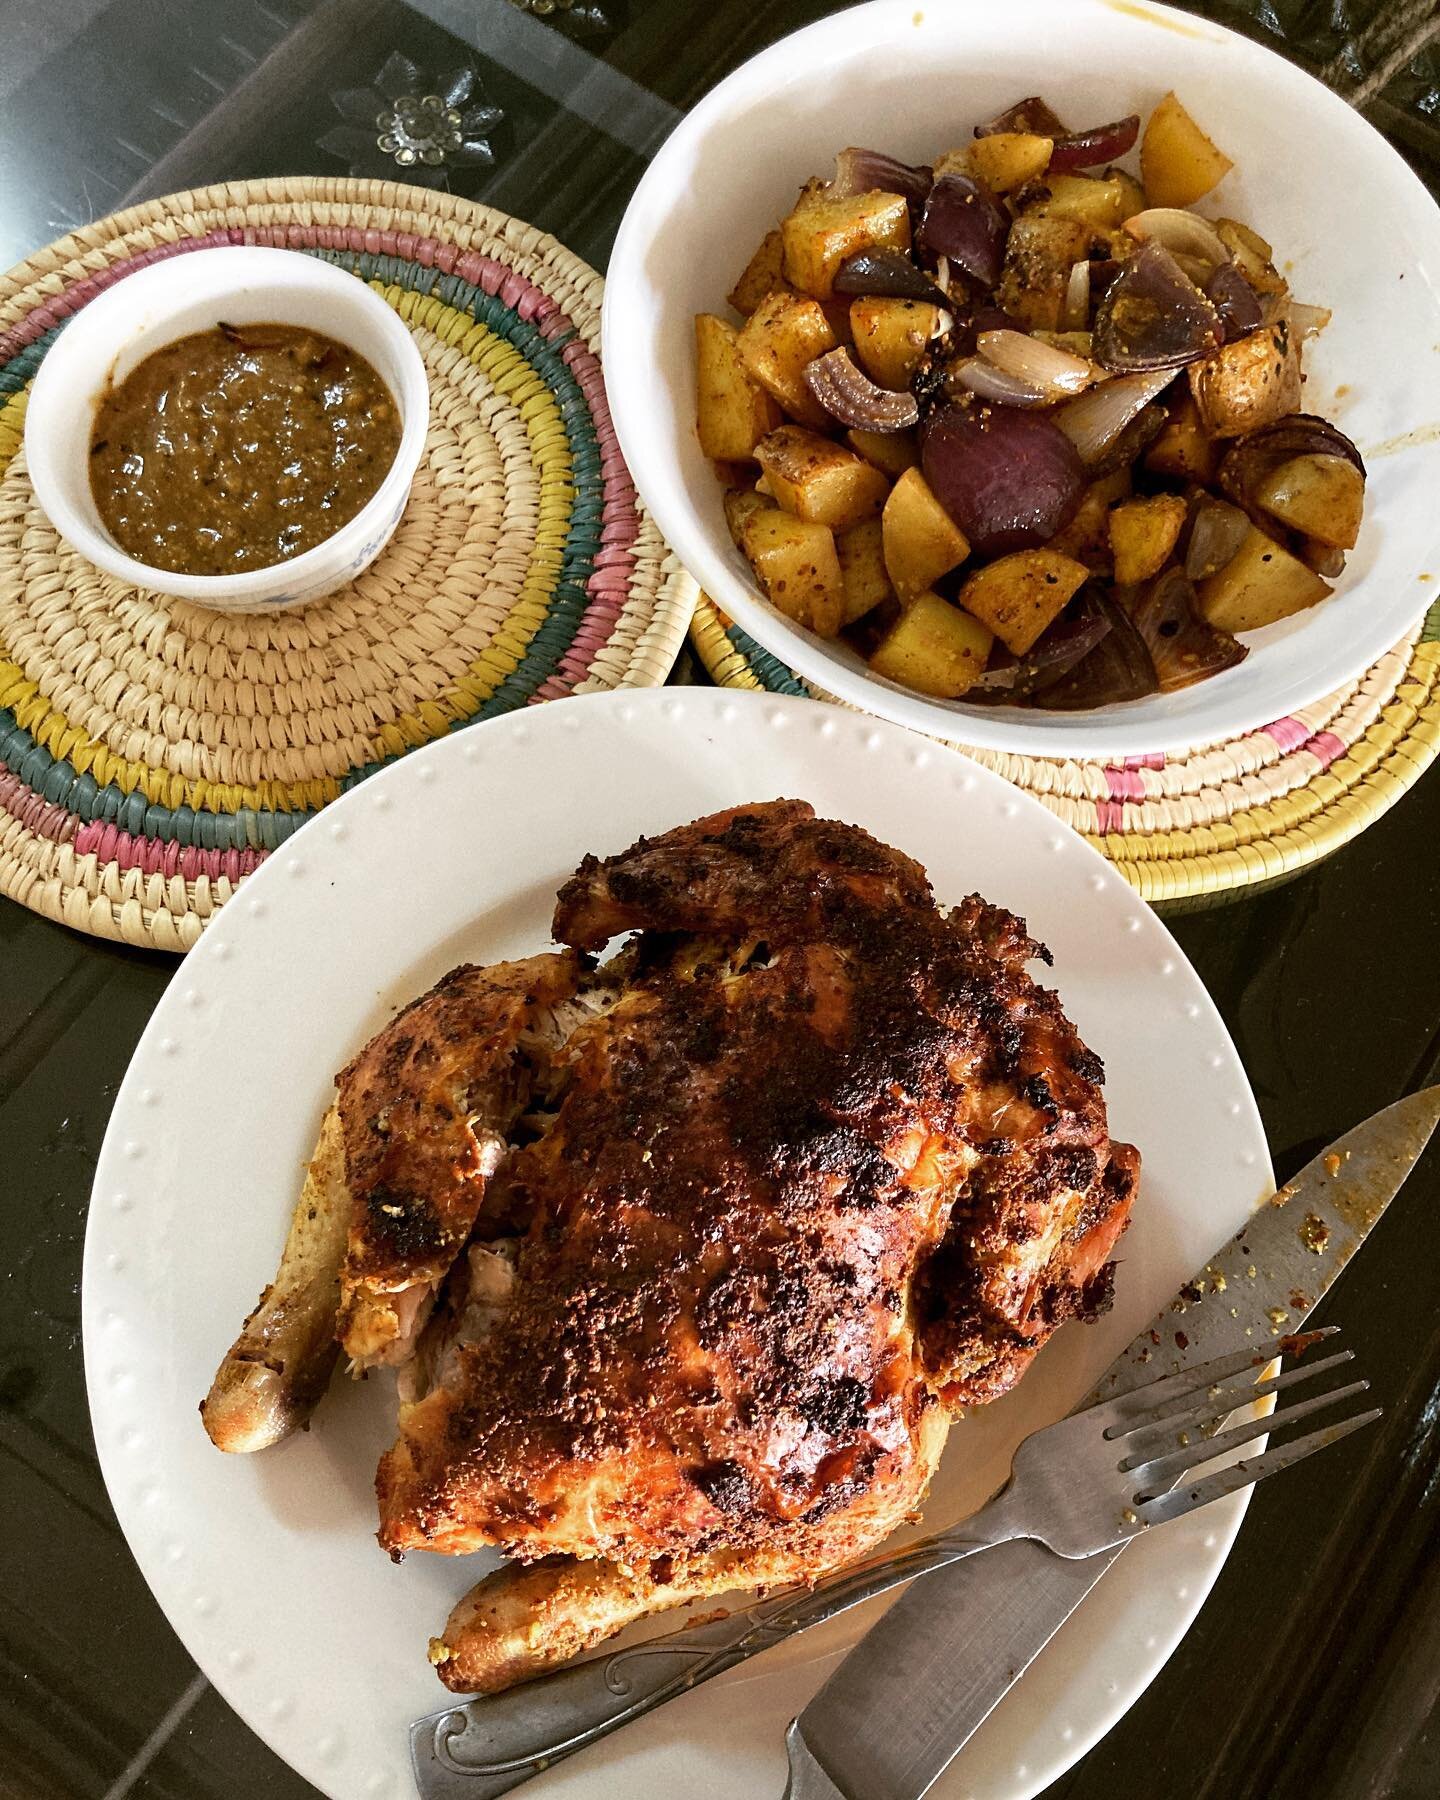 MASALA ROAST CHICKEN 🍗

The ultimate weekend family meal. This is @meerasodha&rsquo;s recipe which is very baby friendly too. 

Roast 1 tbsp cumin seeds with 3/4 tbsp coriander seeds. Pound or grind with half a cinnamon stick, 5 cloves, and 1 tsp bl